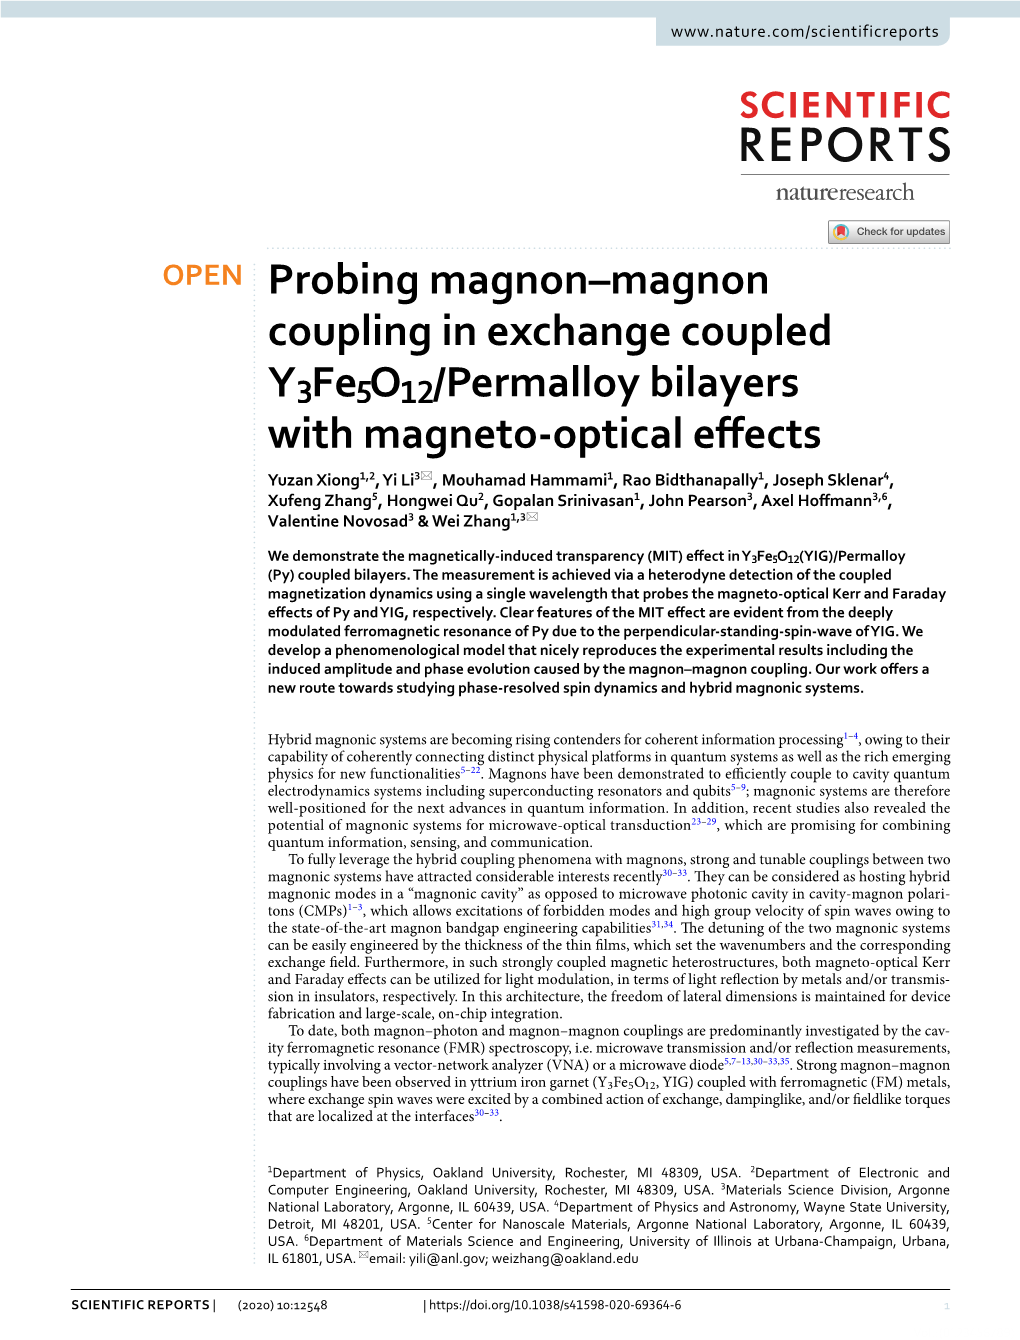 Probing Magnon–Magnon Coupling in Exchange Coupled Yfeo/Permalloy